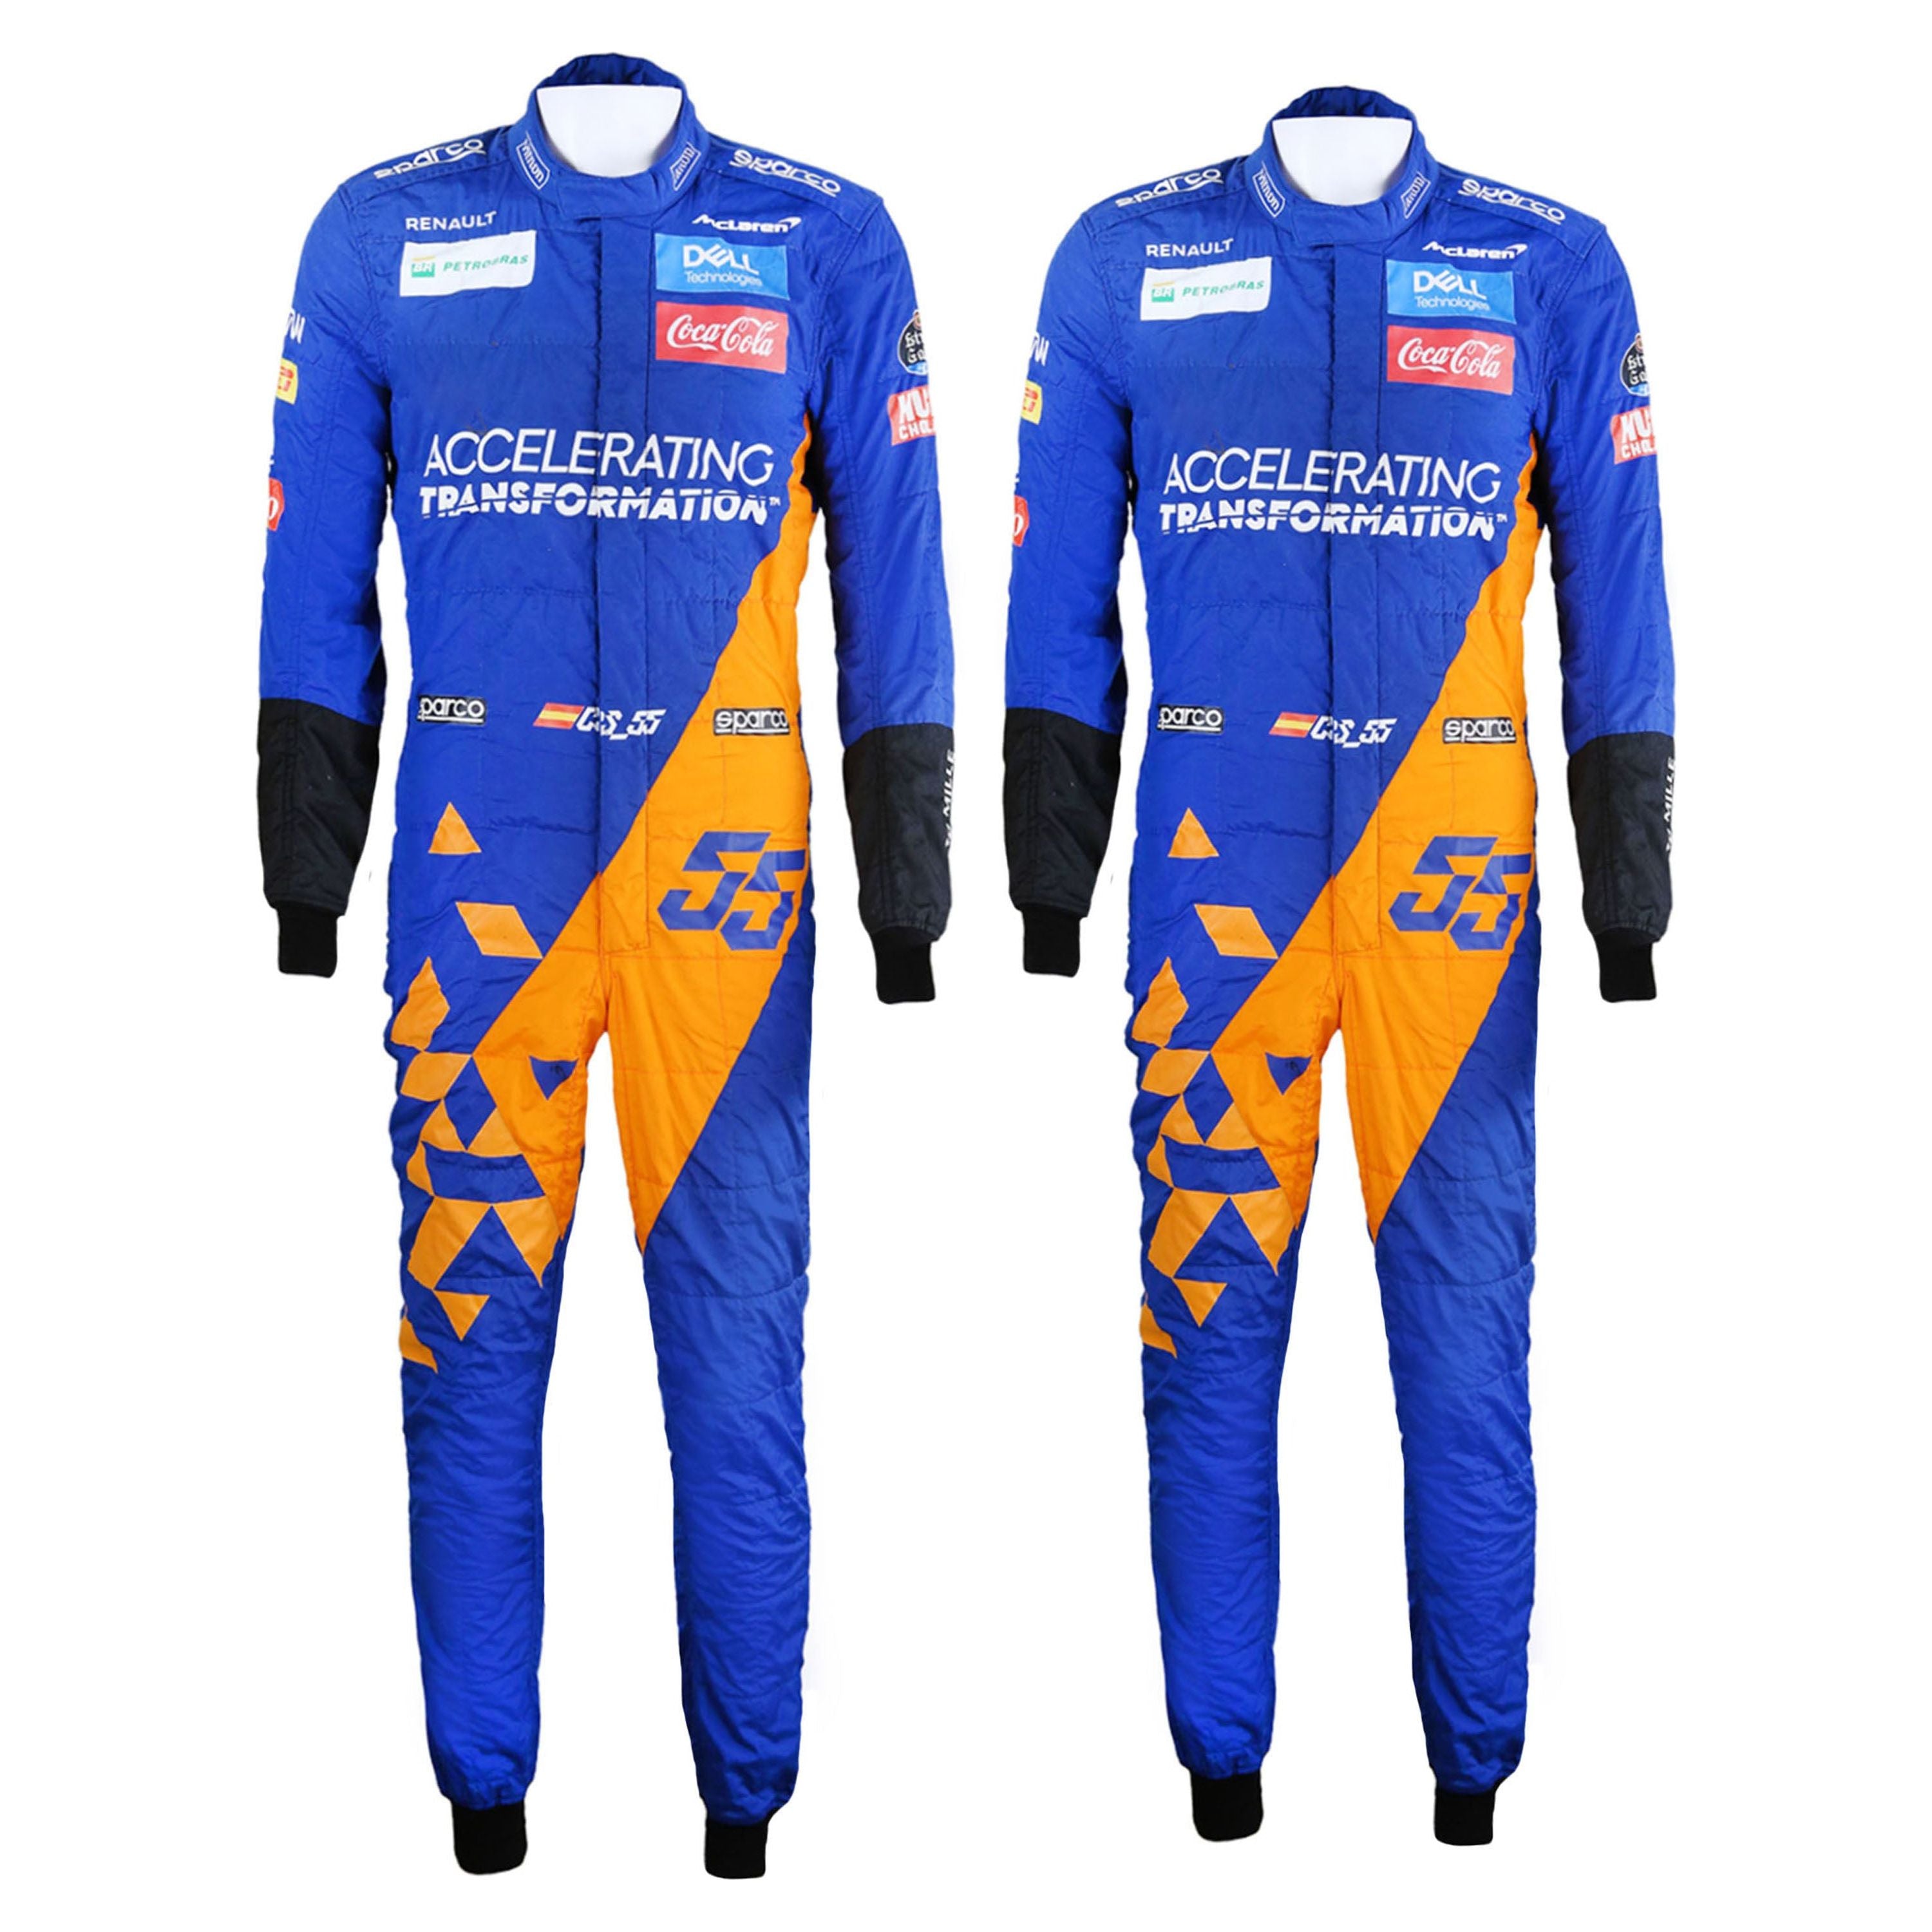 Suit Up for Victory with Race Uniform [Stand Out]